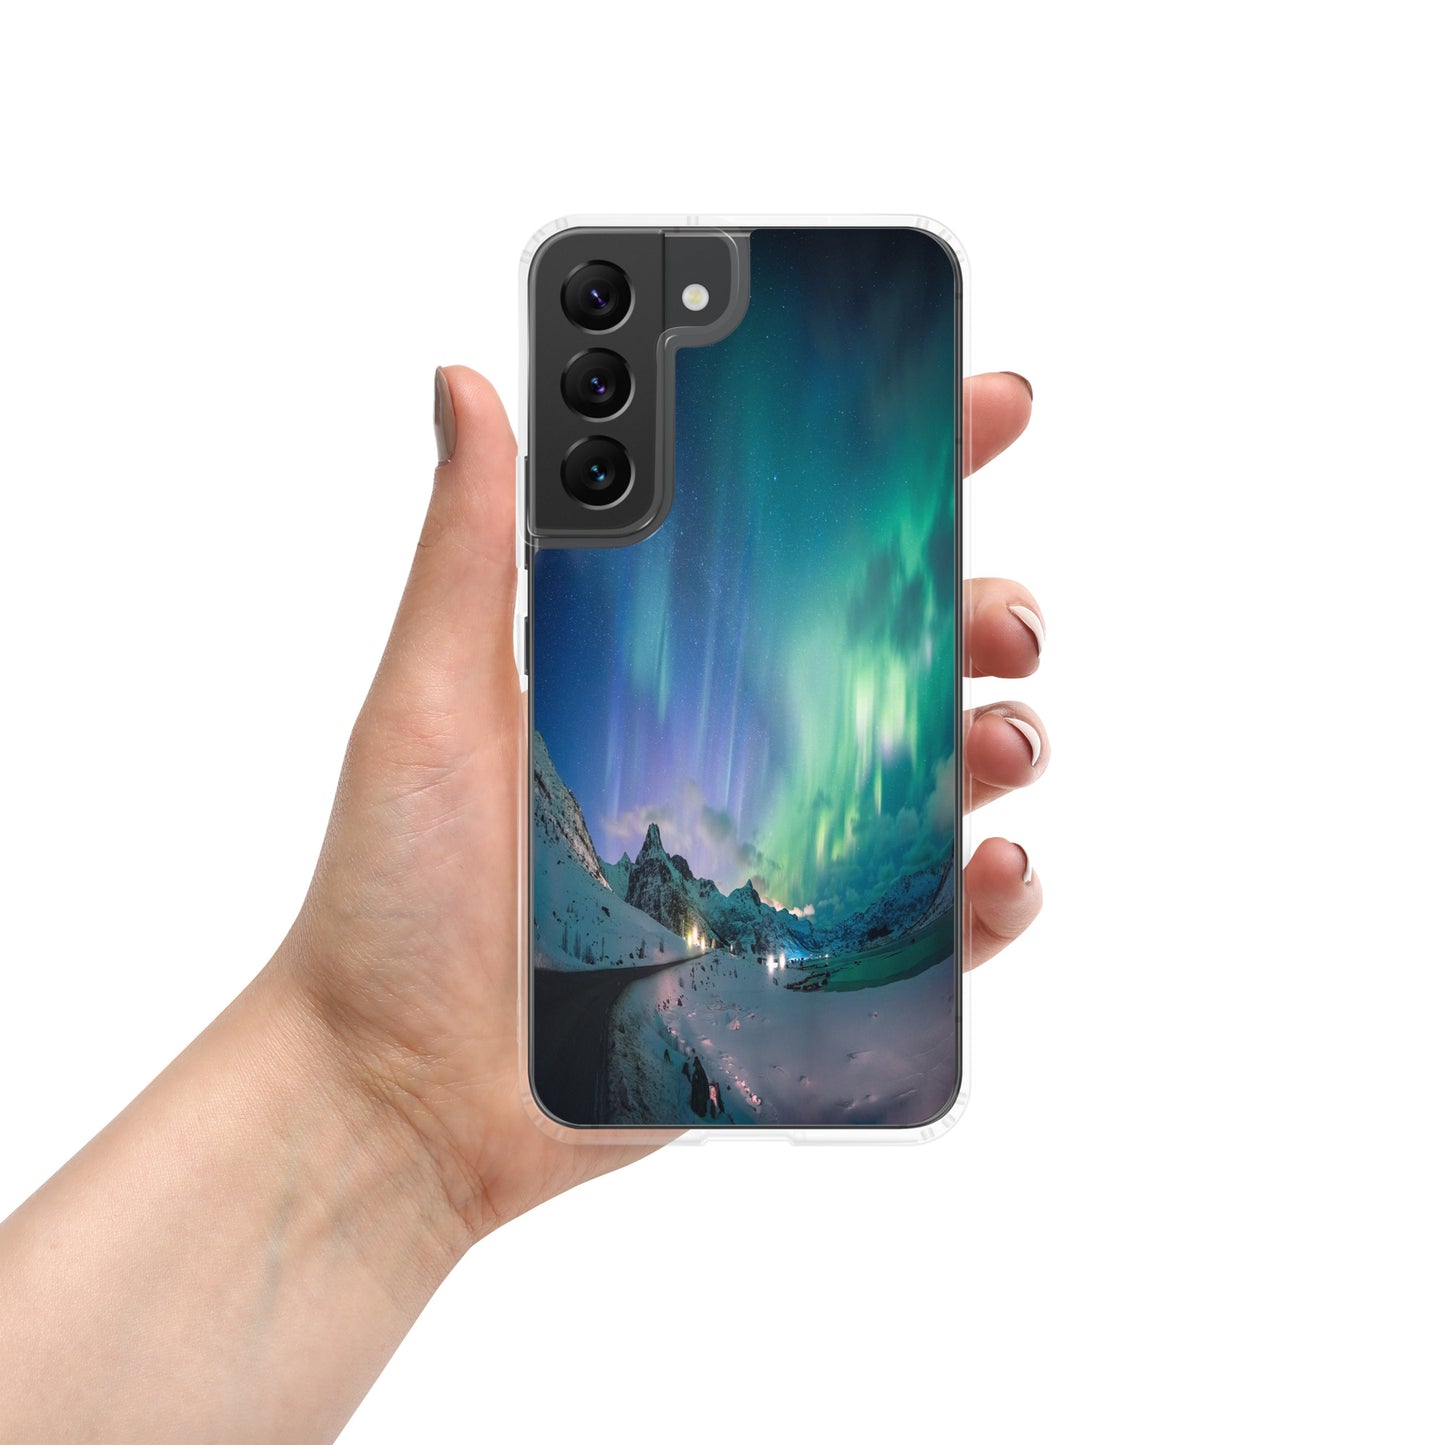 Unique Aurora Borealis Samsung Cover Case - Northern Light Phone Cover Case - Clear Case for Samsung Galaxy - Perfect Aurora Lovers Gift 9